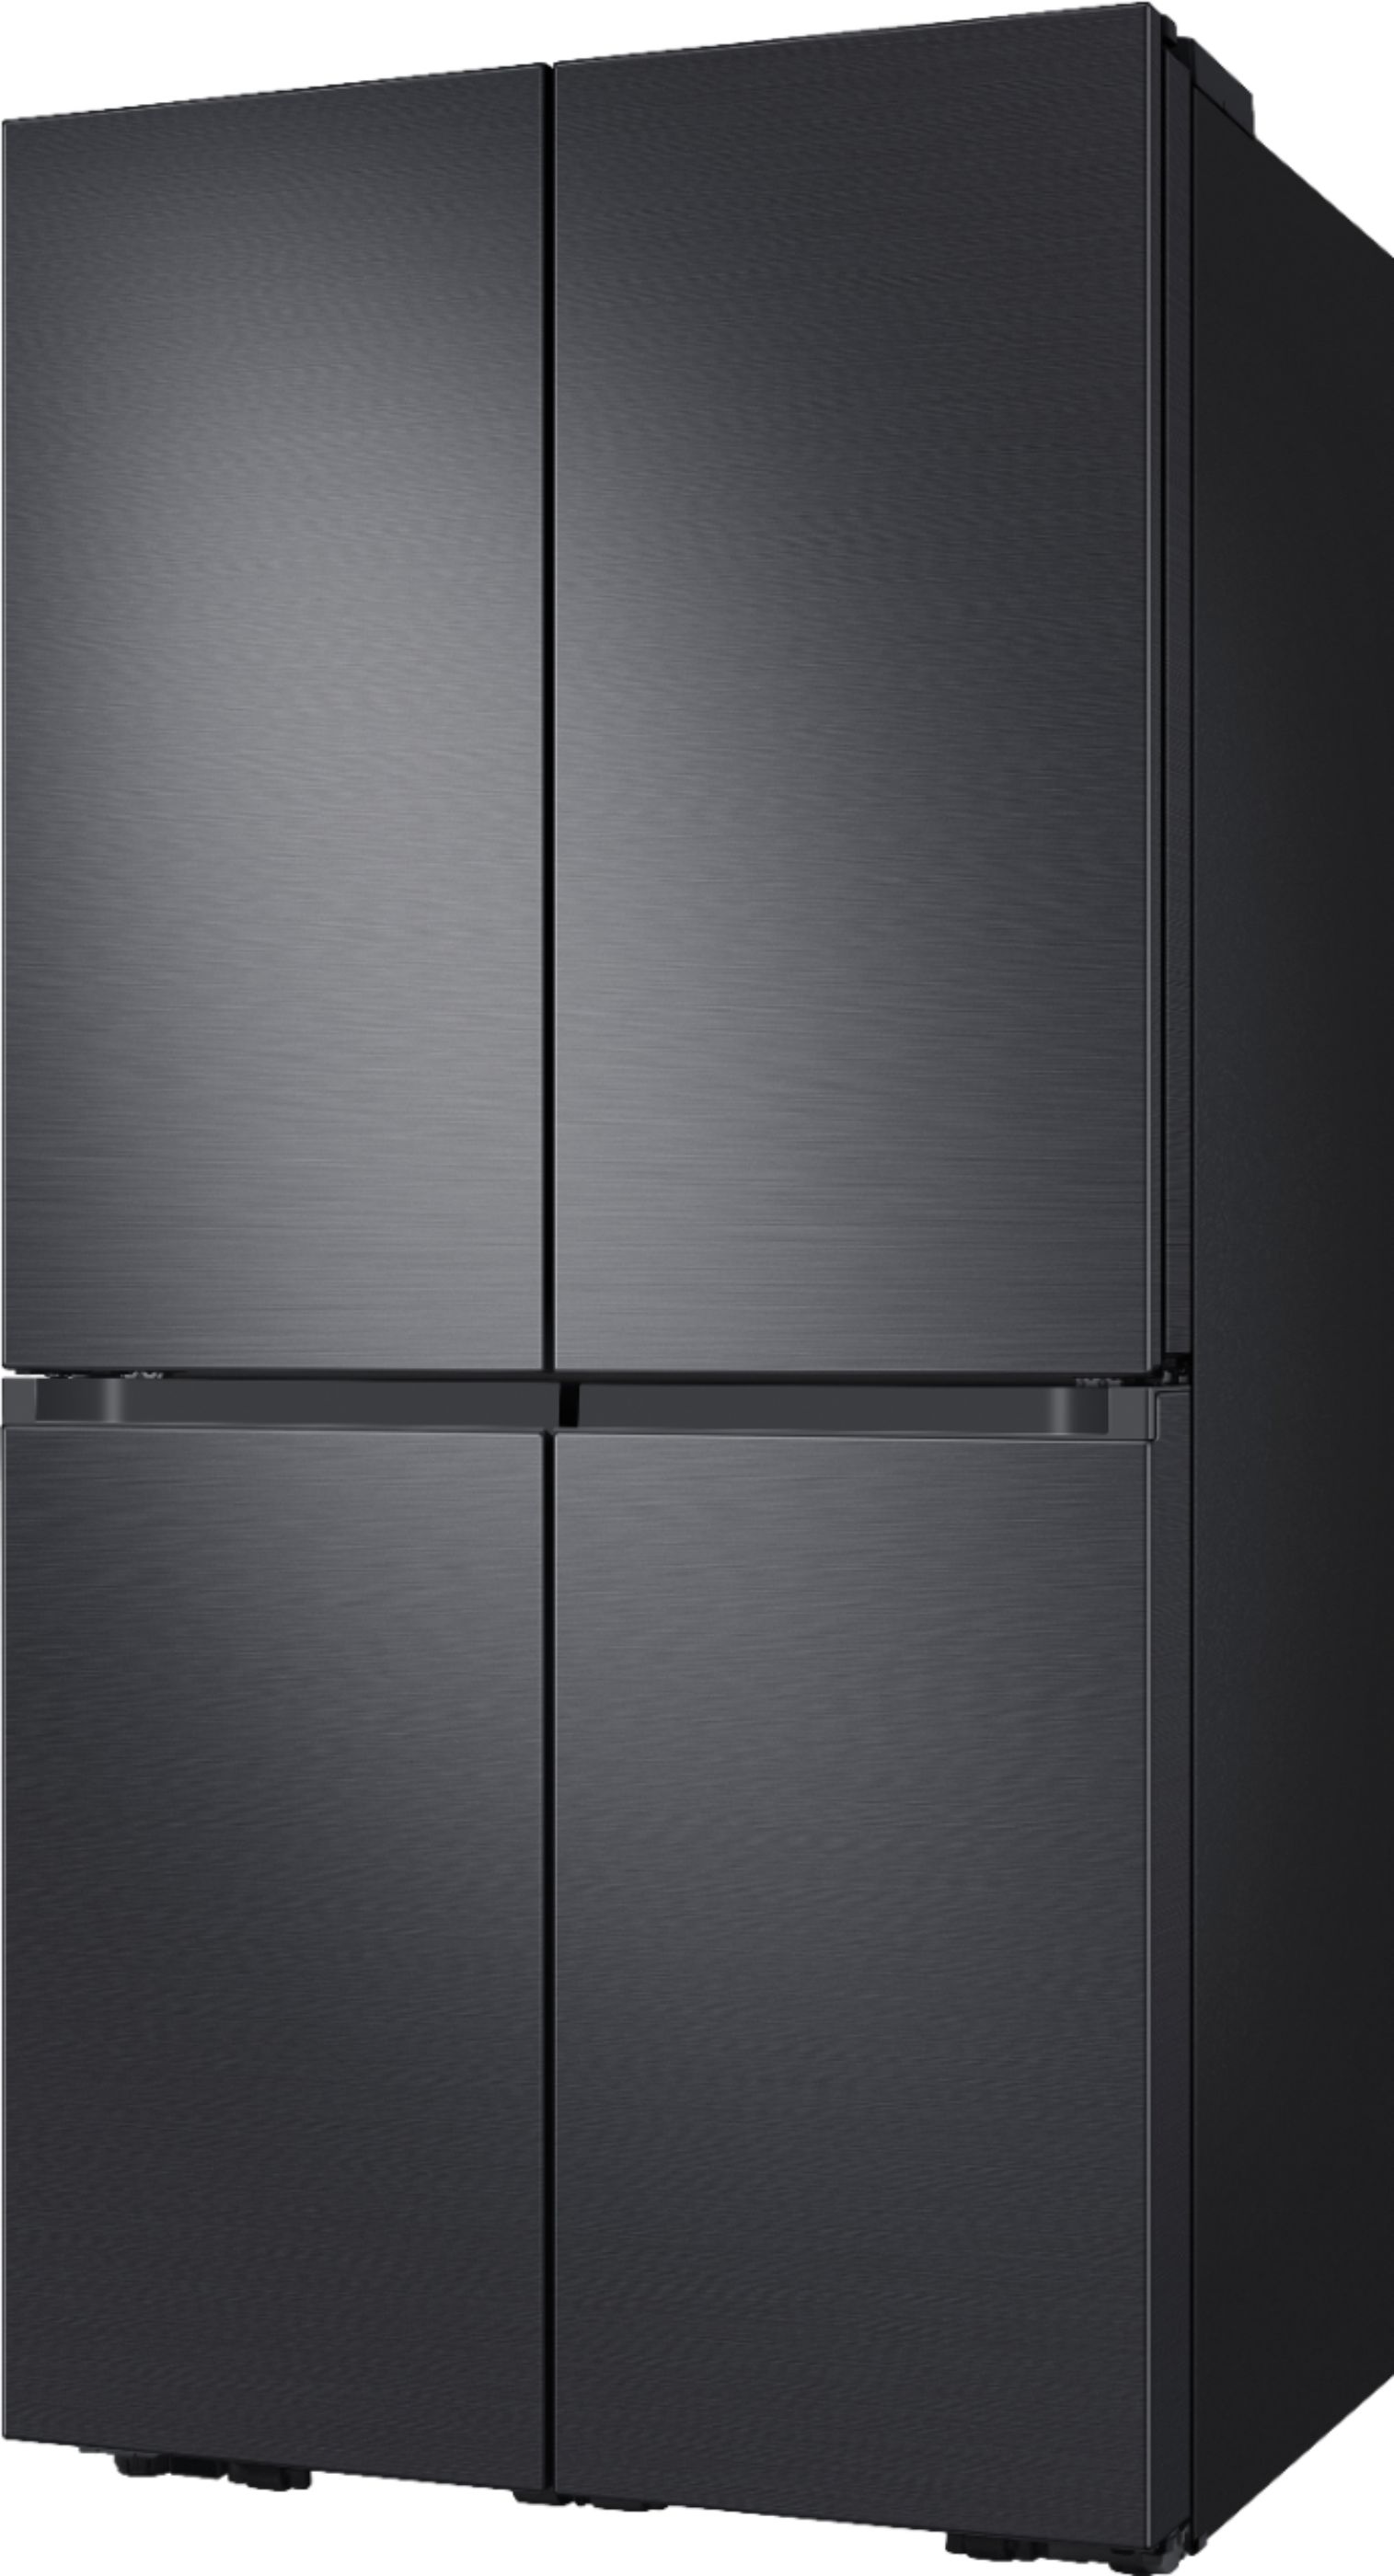 Angle View: Samsung - Bespoke 24 cu. ft Counter Depth 3-Door French Door Refrigerator with AutoFill Water Pitcher - Stainless steel